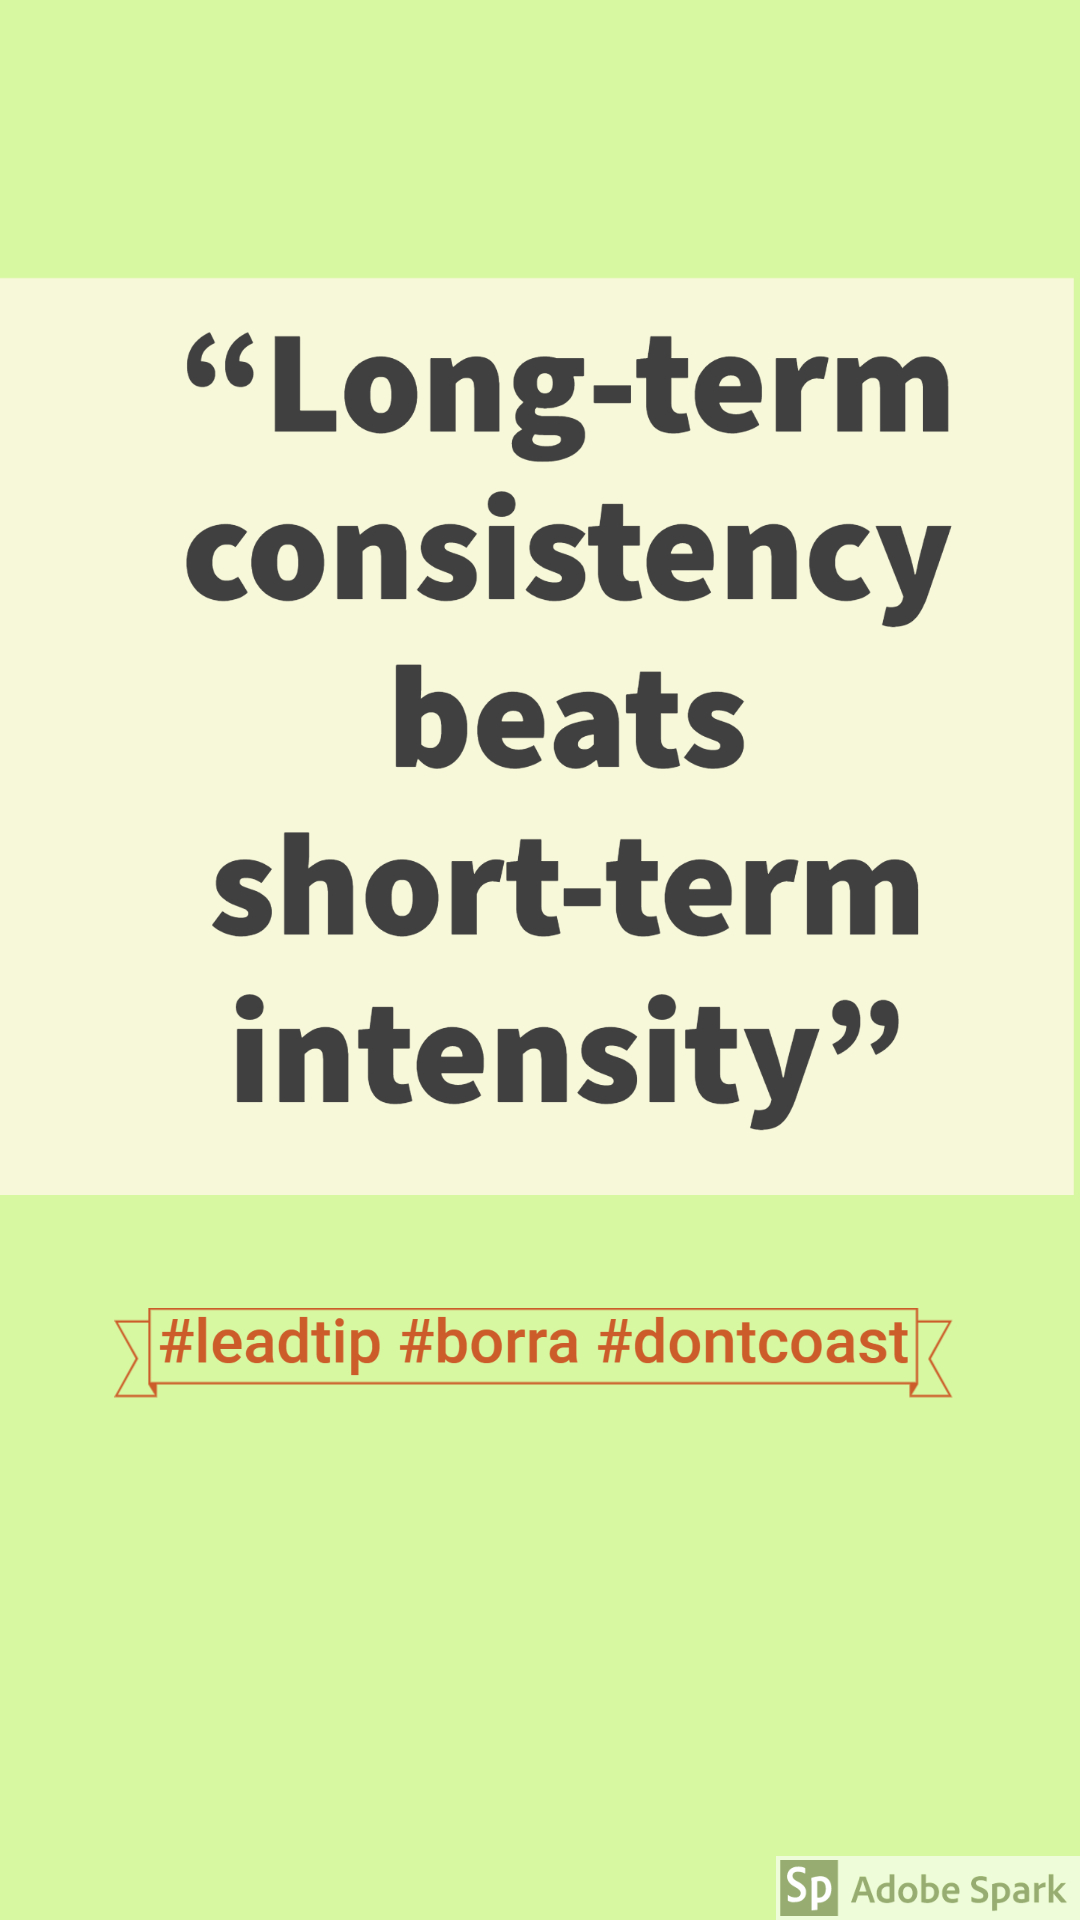 Consistency is the key !!